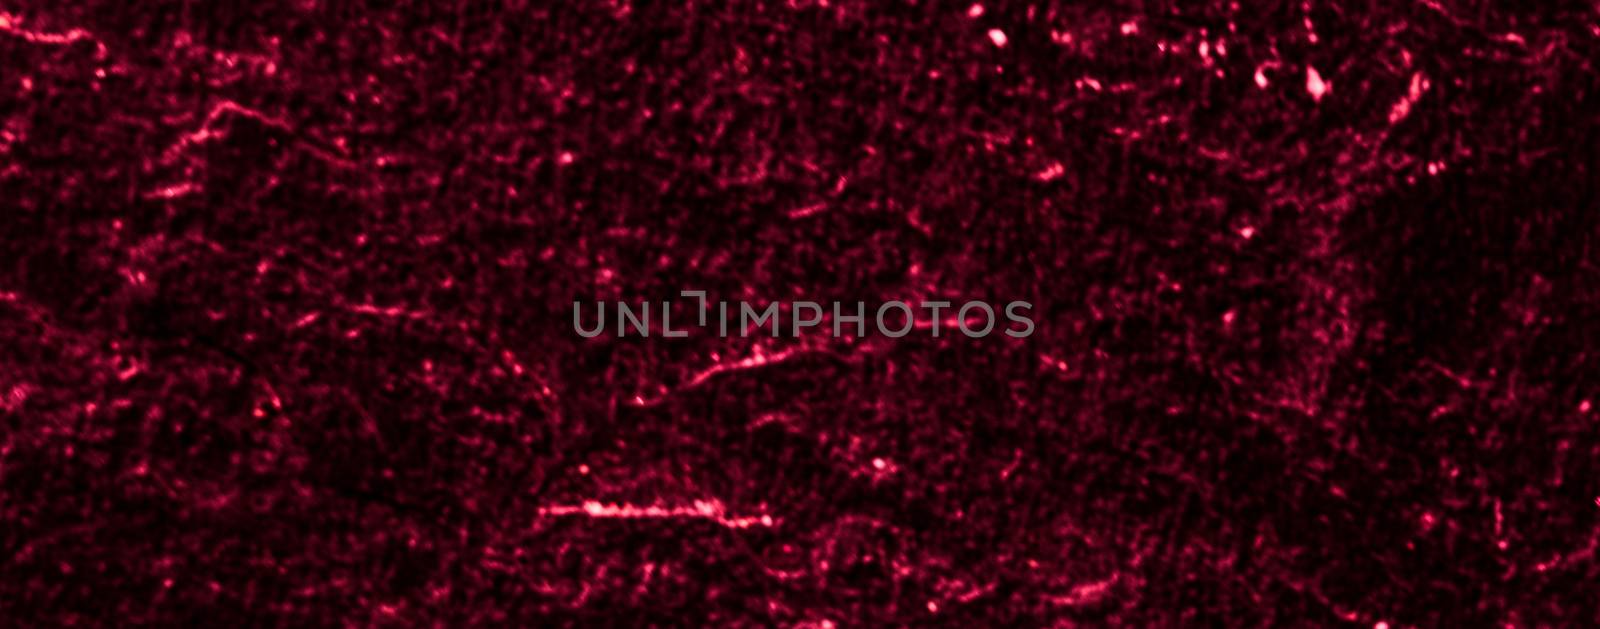 Red stone texture as abstract background, design material and textured surfaces